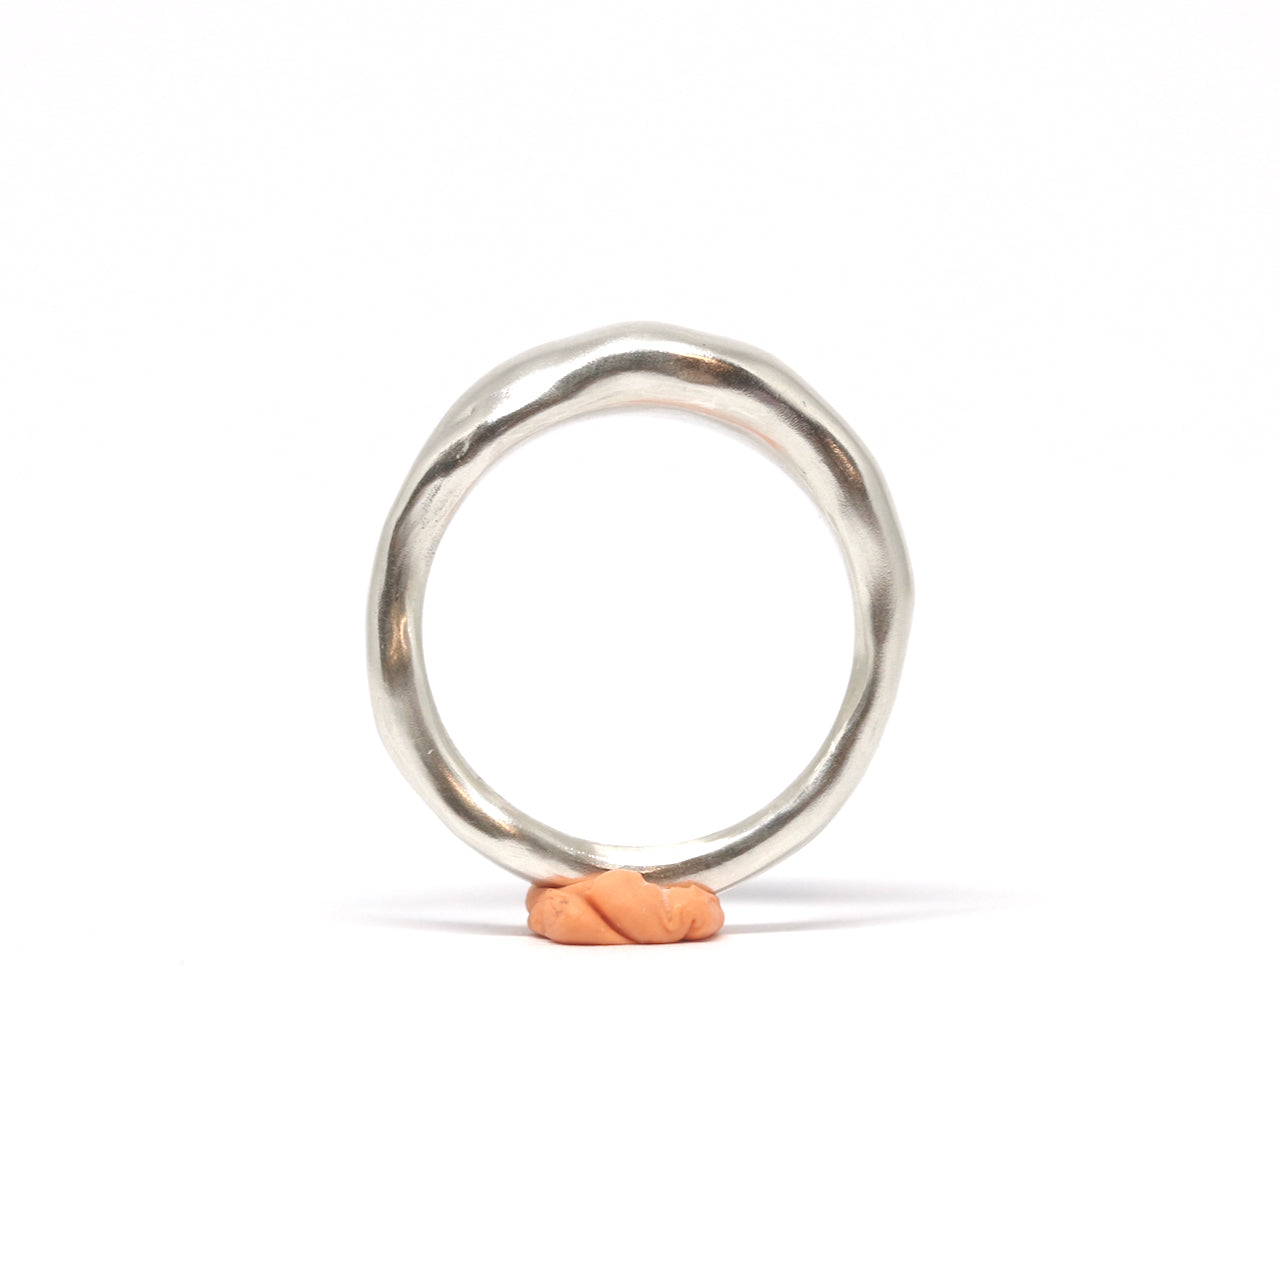 A curvy sterling silver ring. This ring was hand made in Wānaka, New Zealand by designer and jeweller Briar Hardy-Hesson.